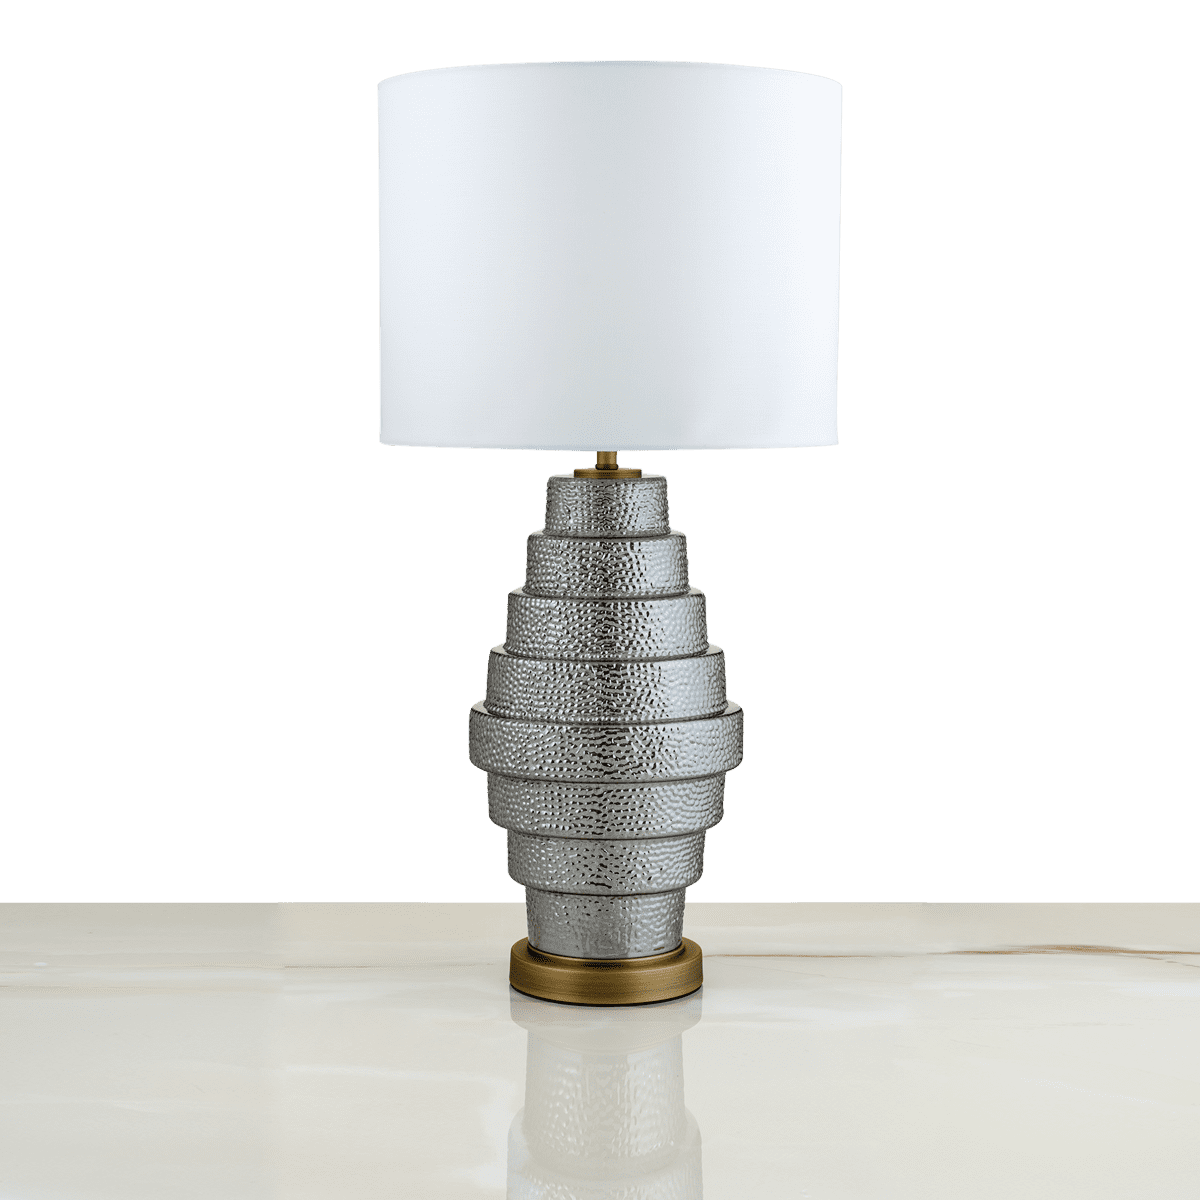 Reese Table Lamp